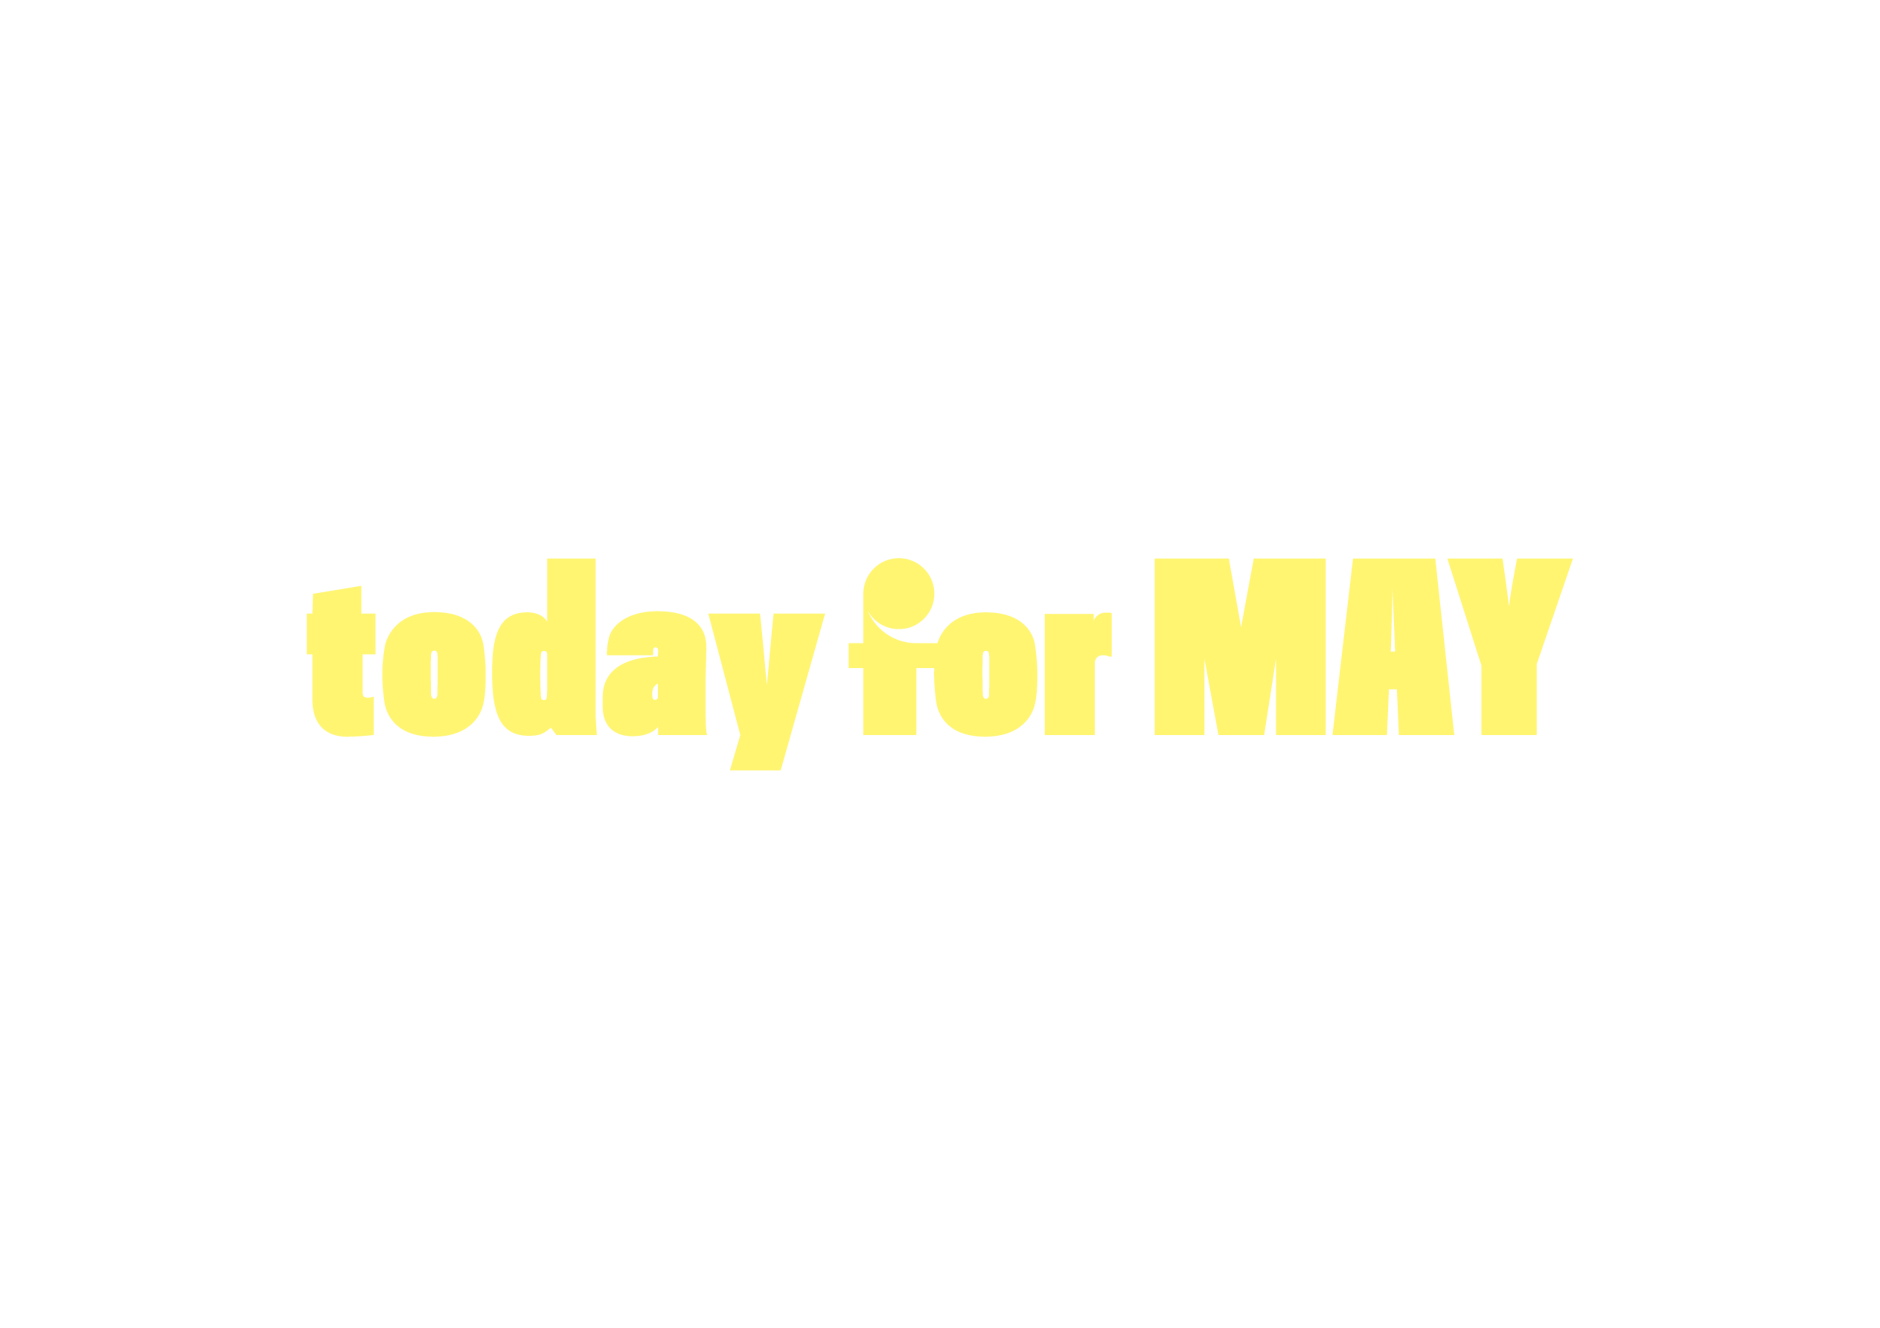 today for MAY